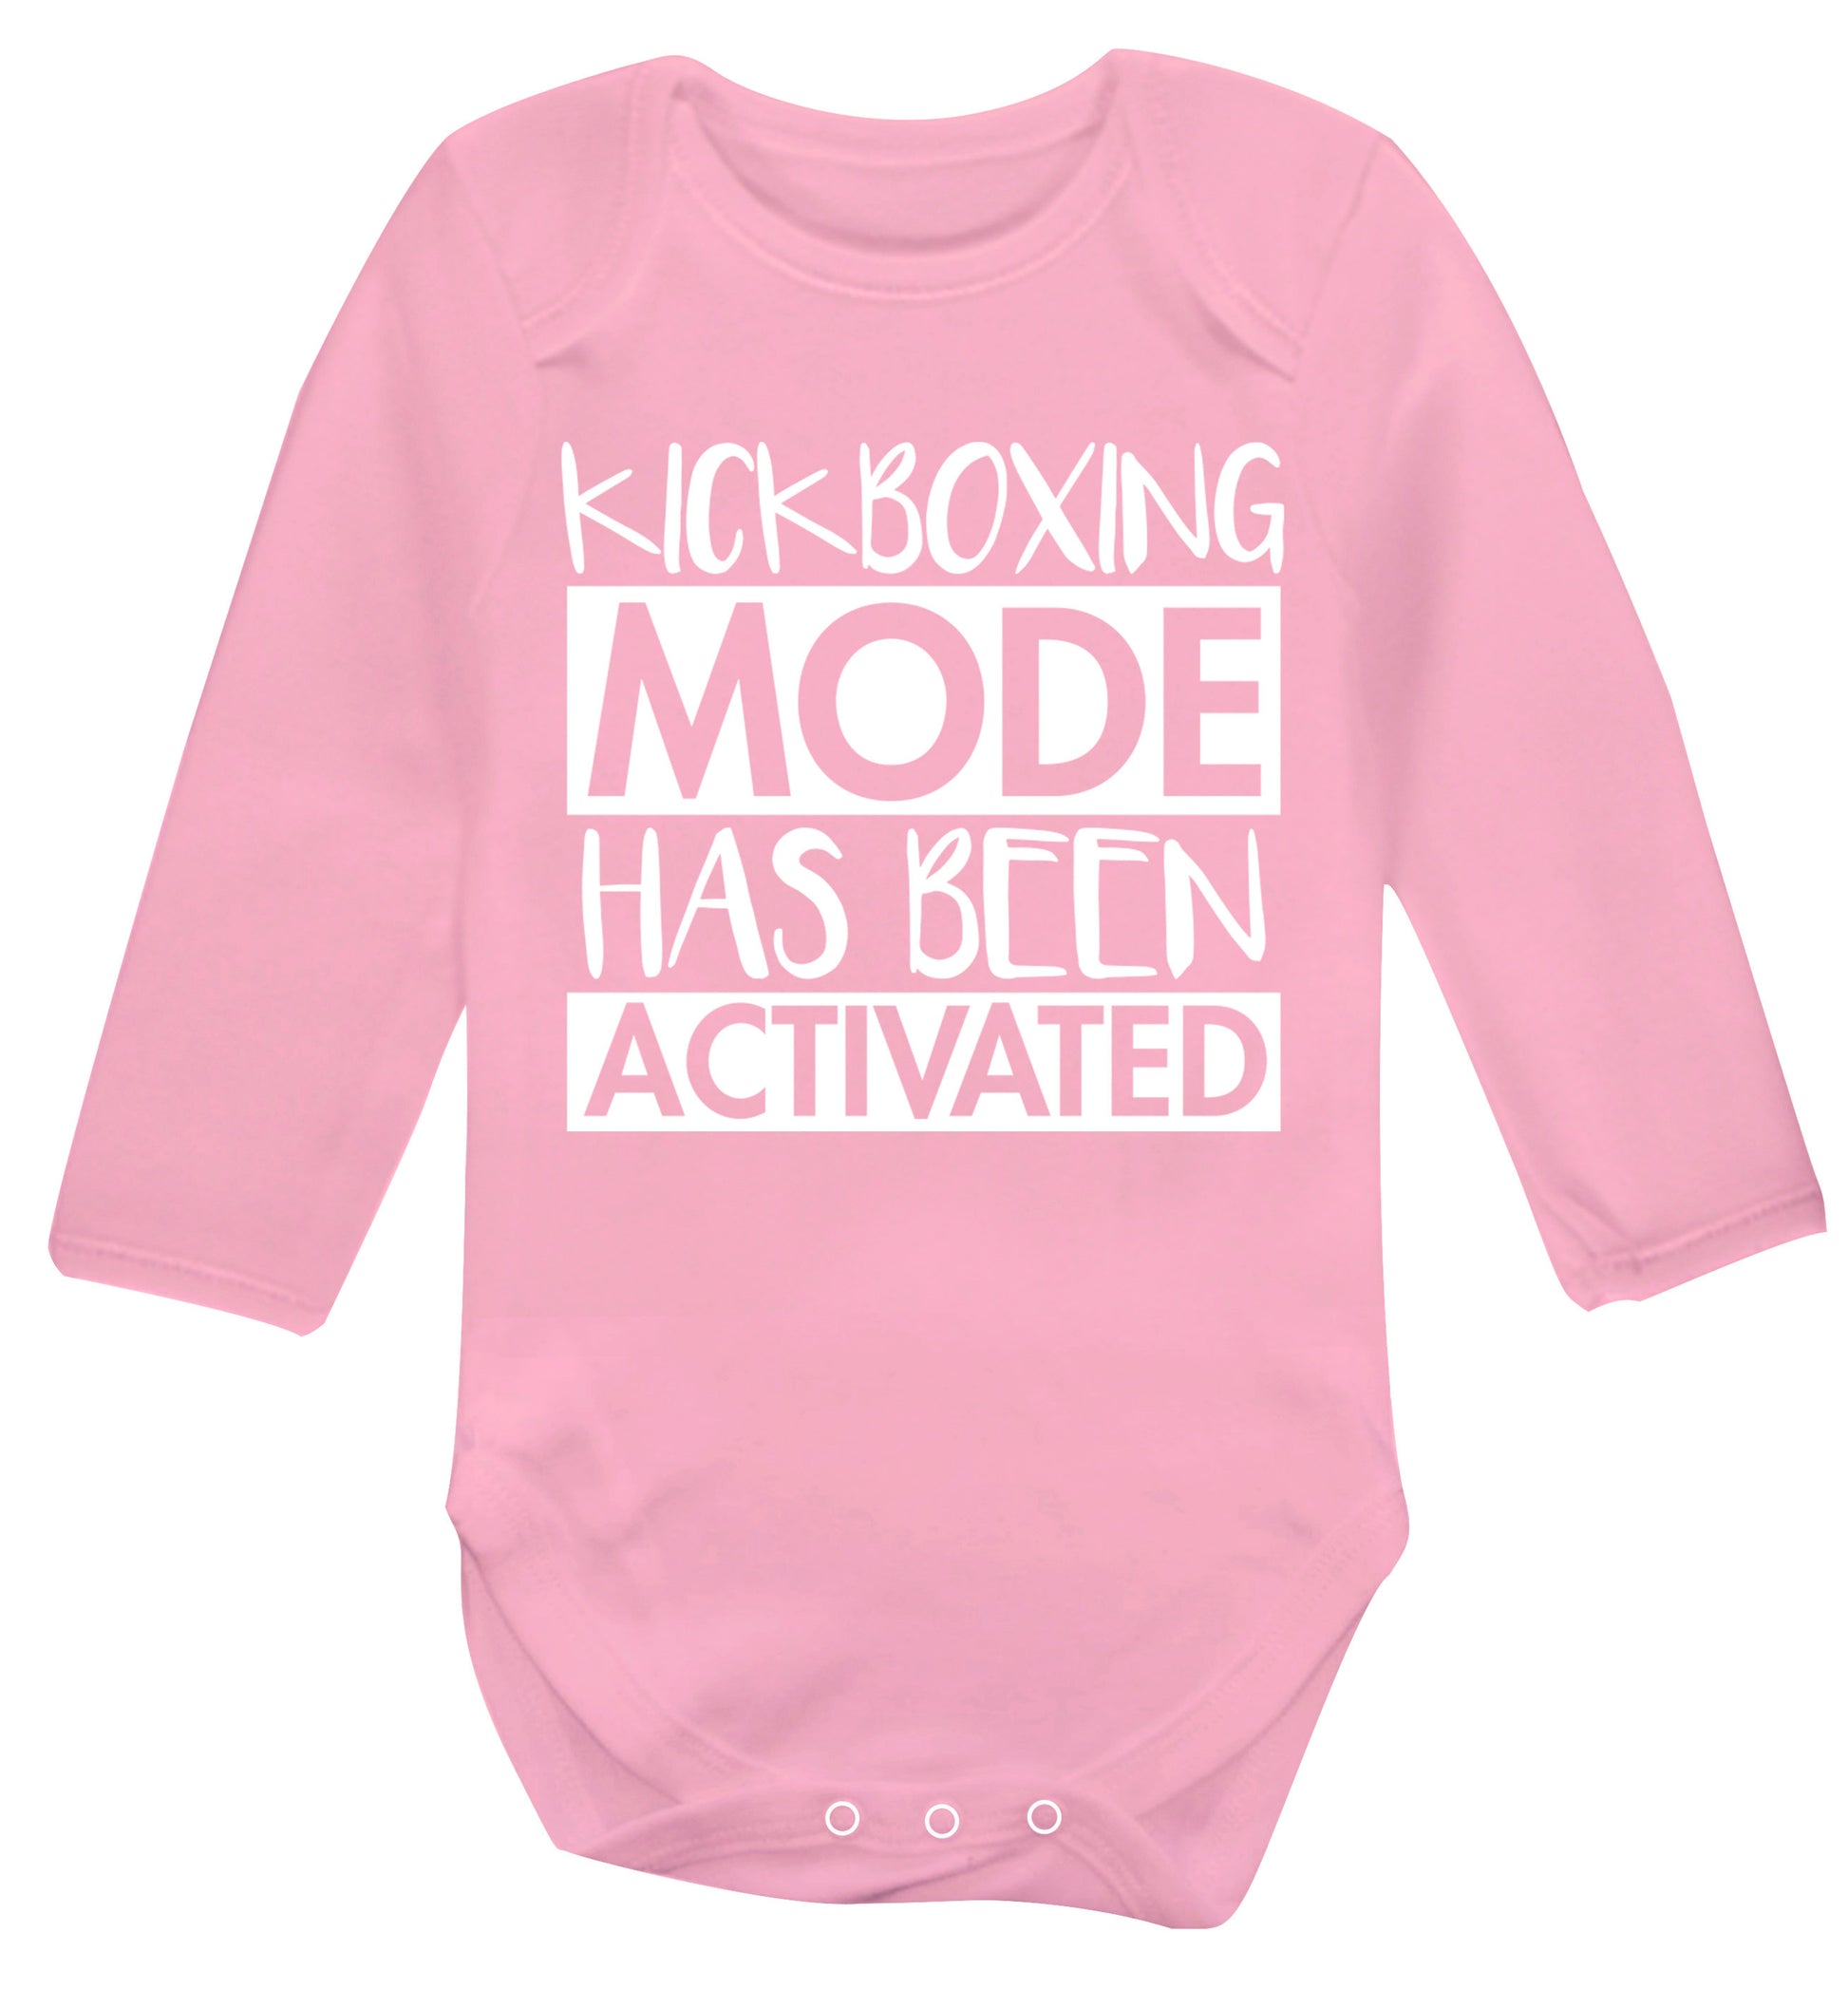 Kickboxing mode activated Baby Vest long sleeved pale pink 6-12 months